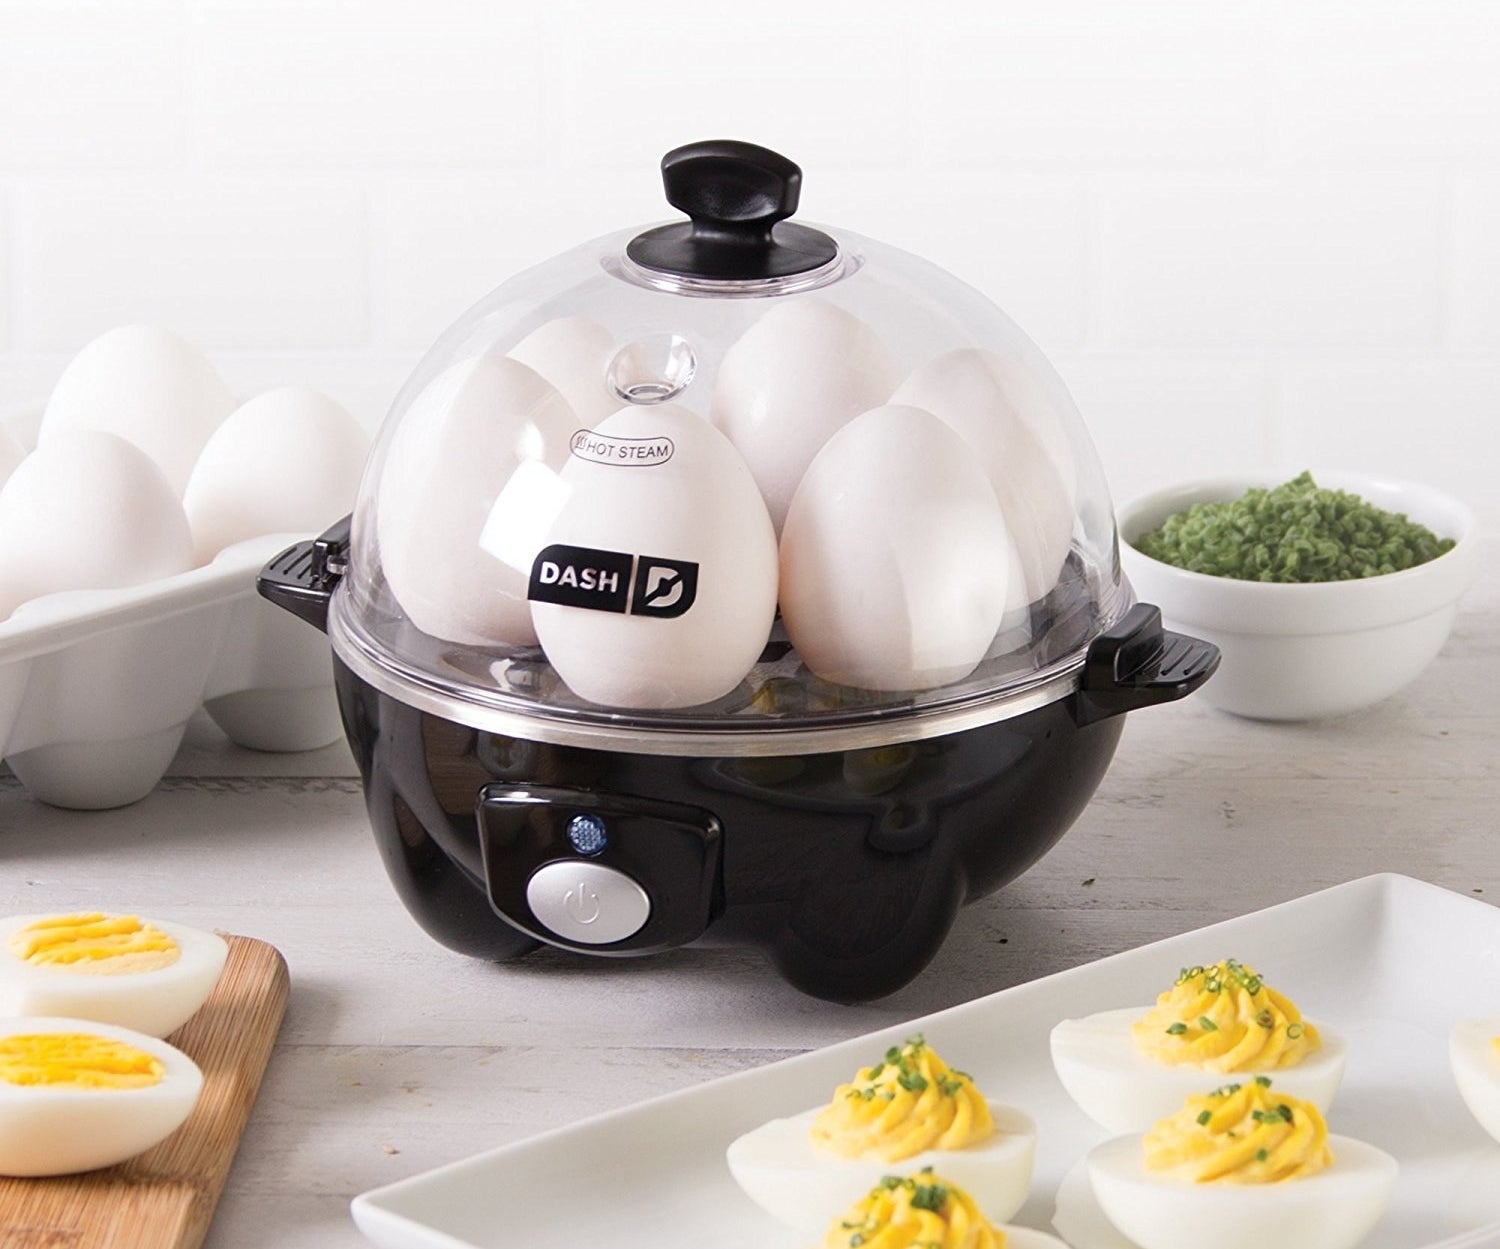 The black egg cooker with six eggs, plus a tray of deviled eggs